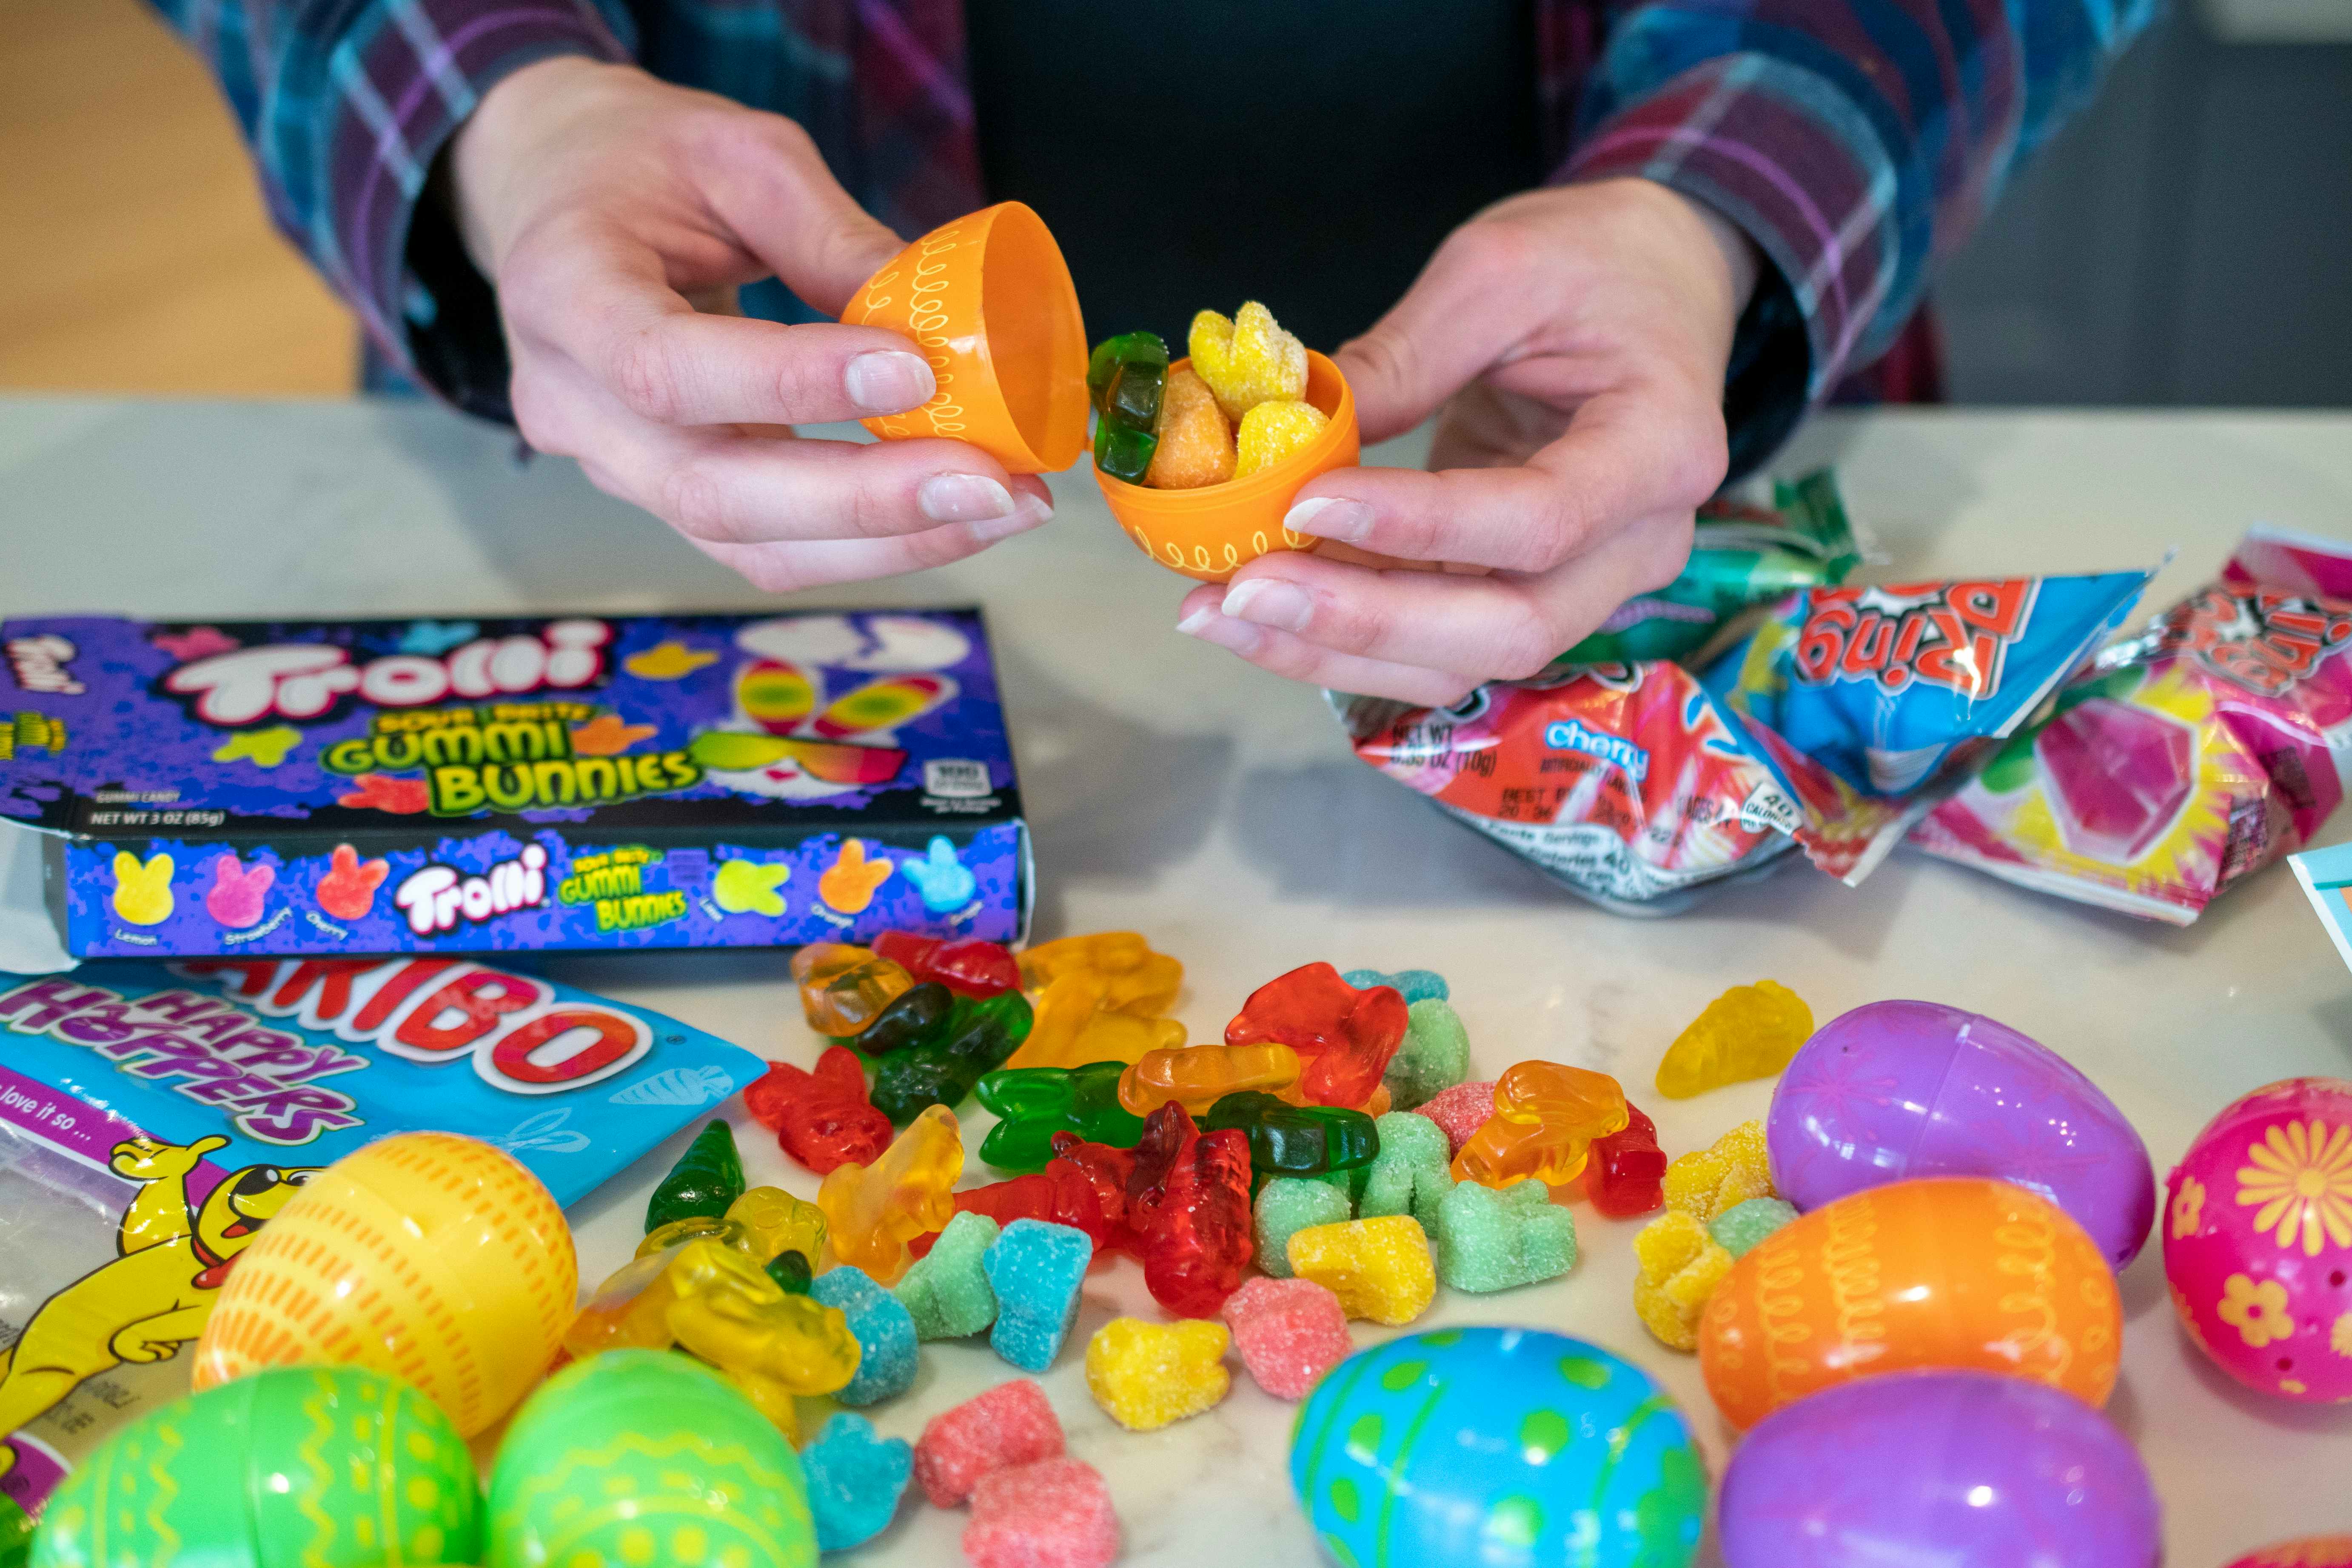 A pile of candy is on a countertop surrounded by plastic Easter eggs. A person is filling an egg with some of the candy.